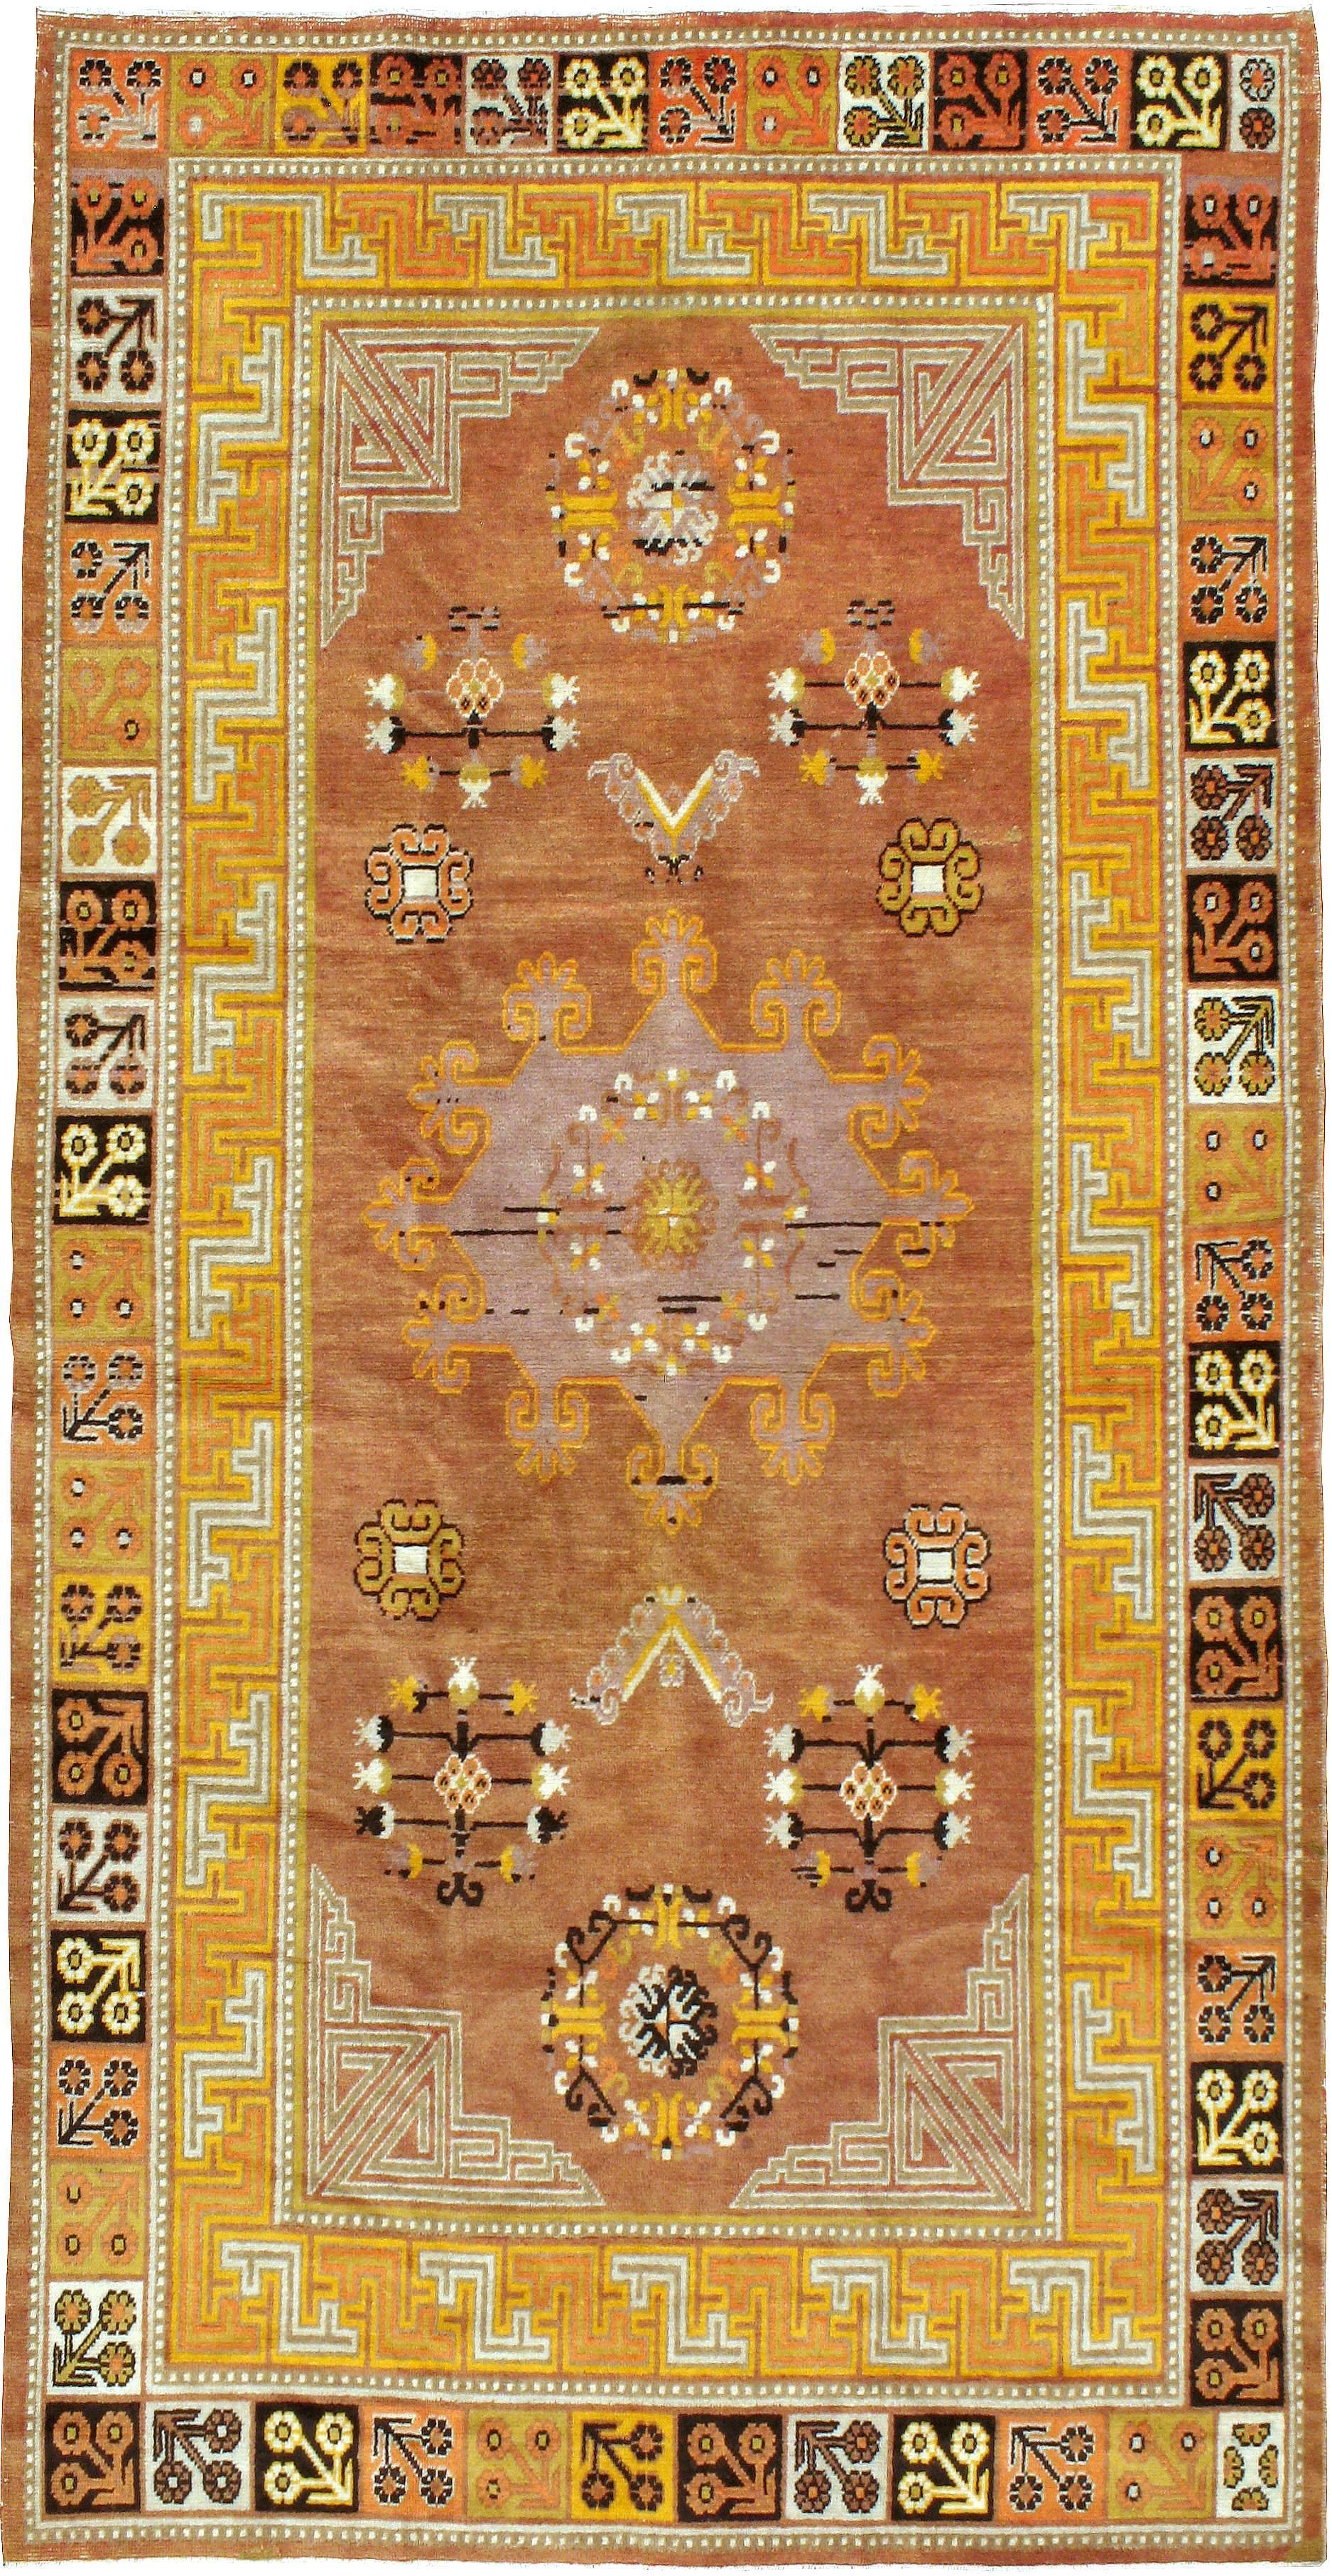 An antique East Turkestan Khotan carpet from the first quarter of the 20th century. Antique Khotan rugs and carpets were produced in the oasis town of Eastern Turkestan, today part of the Xinjiang region in Western China. This area has had a steady